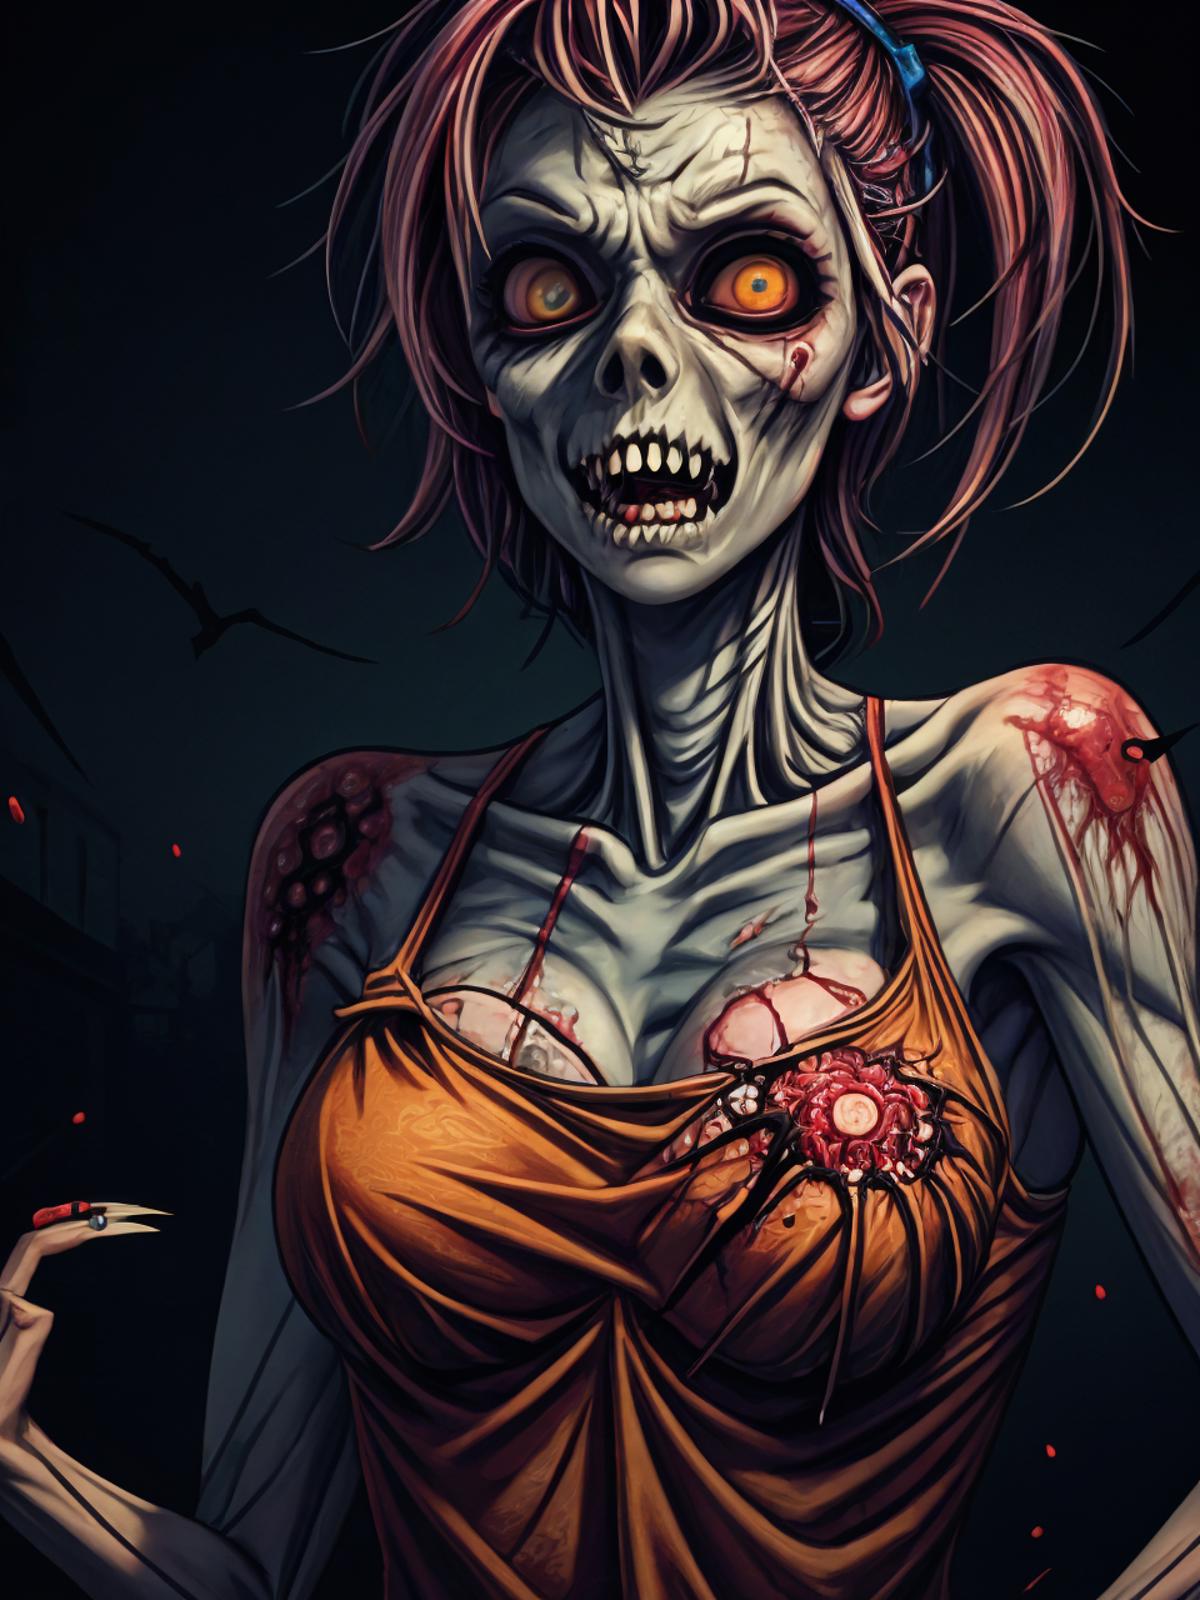 Zombie woman with pink hair and orange dress.